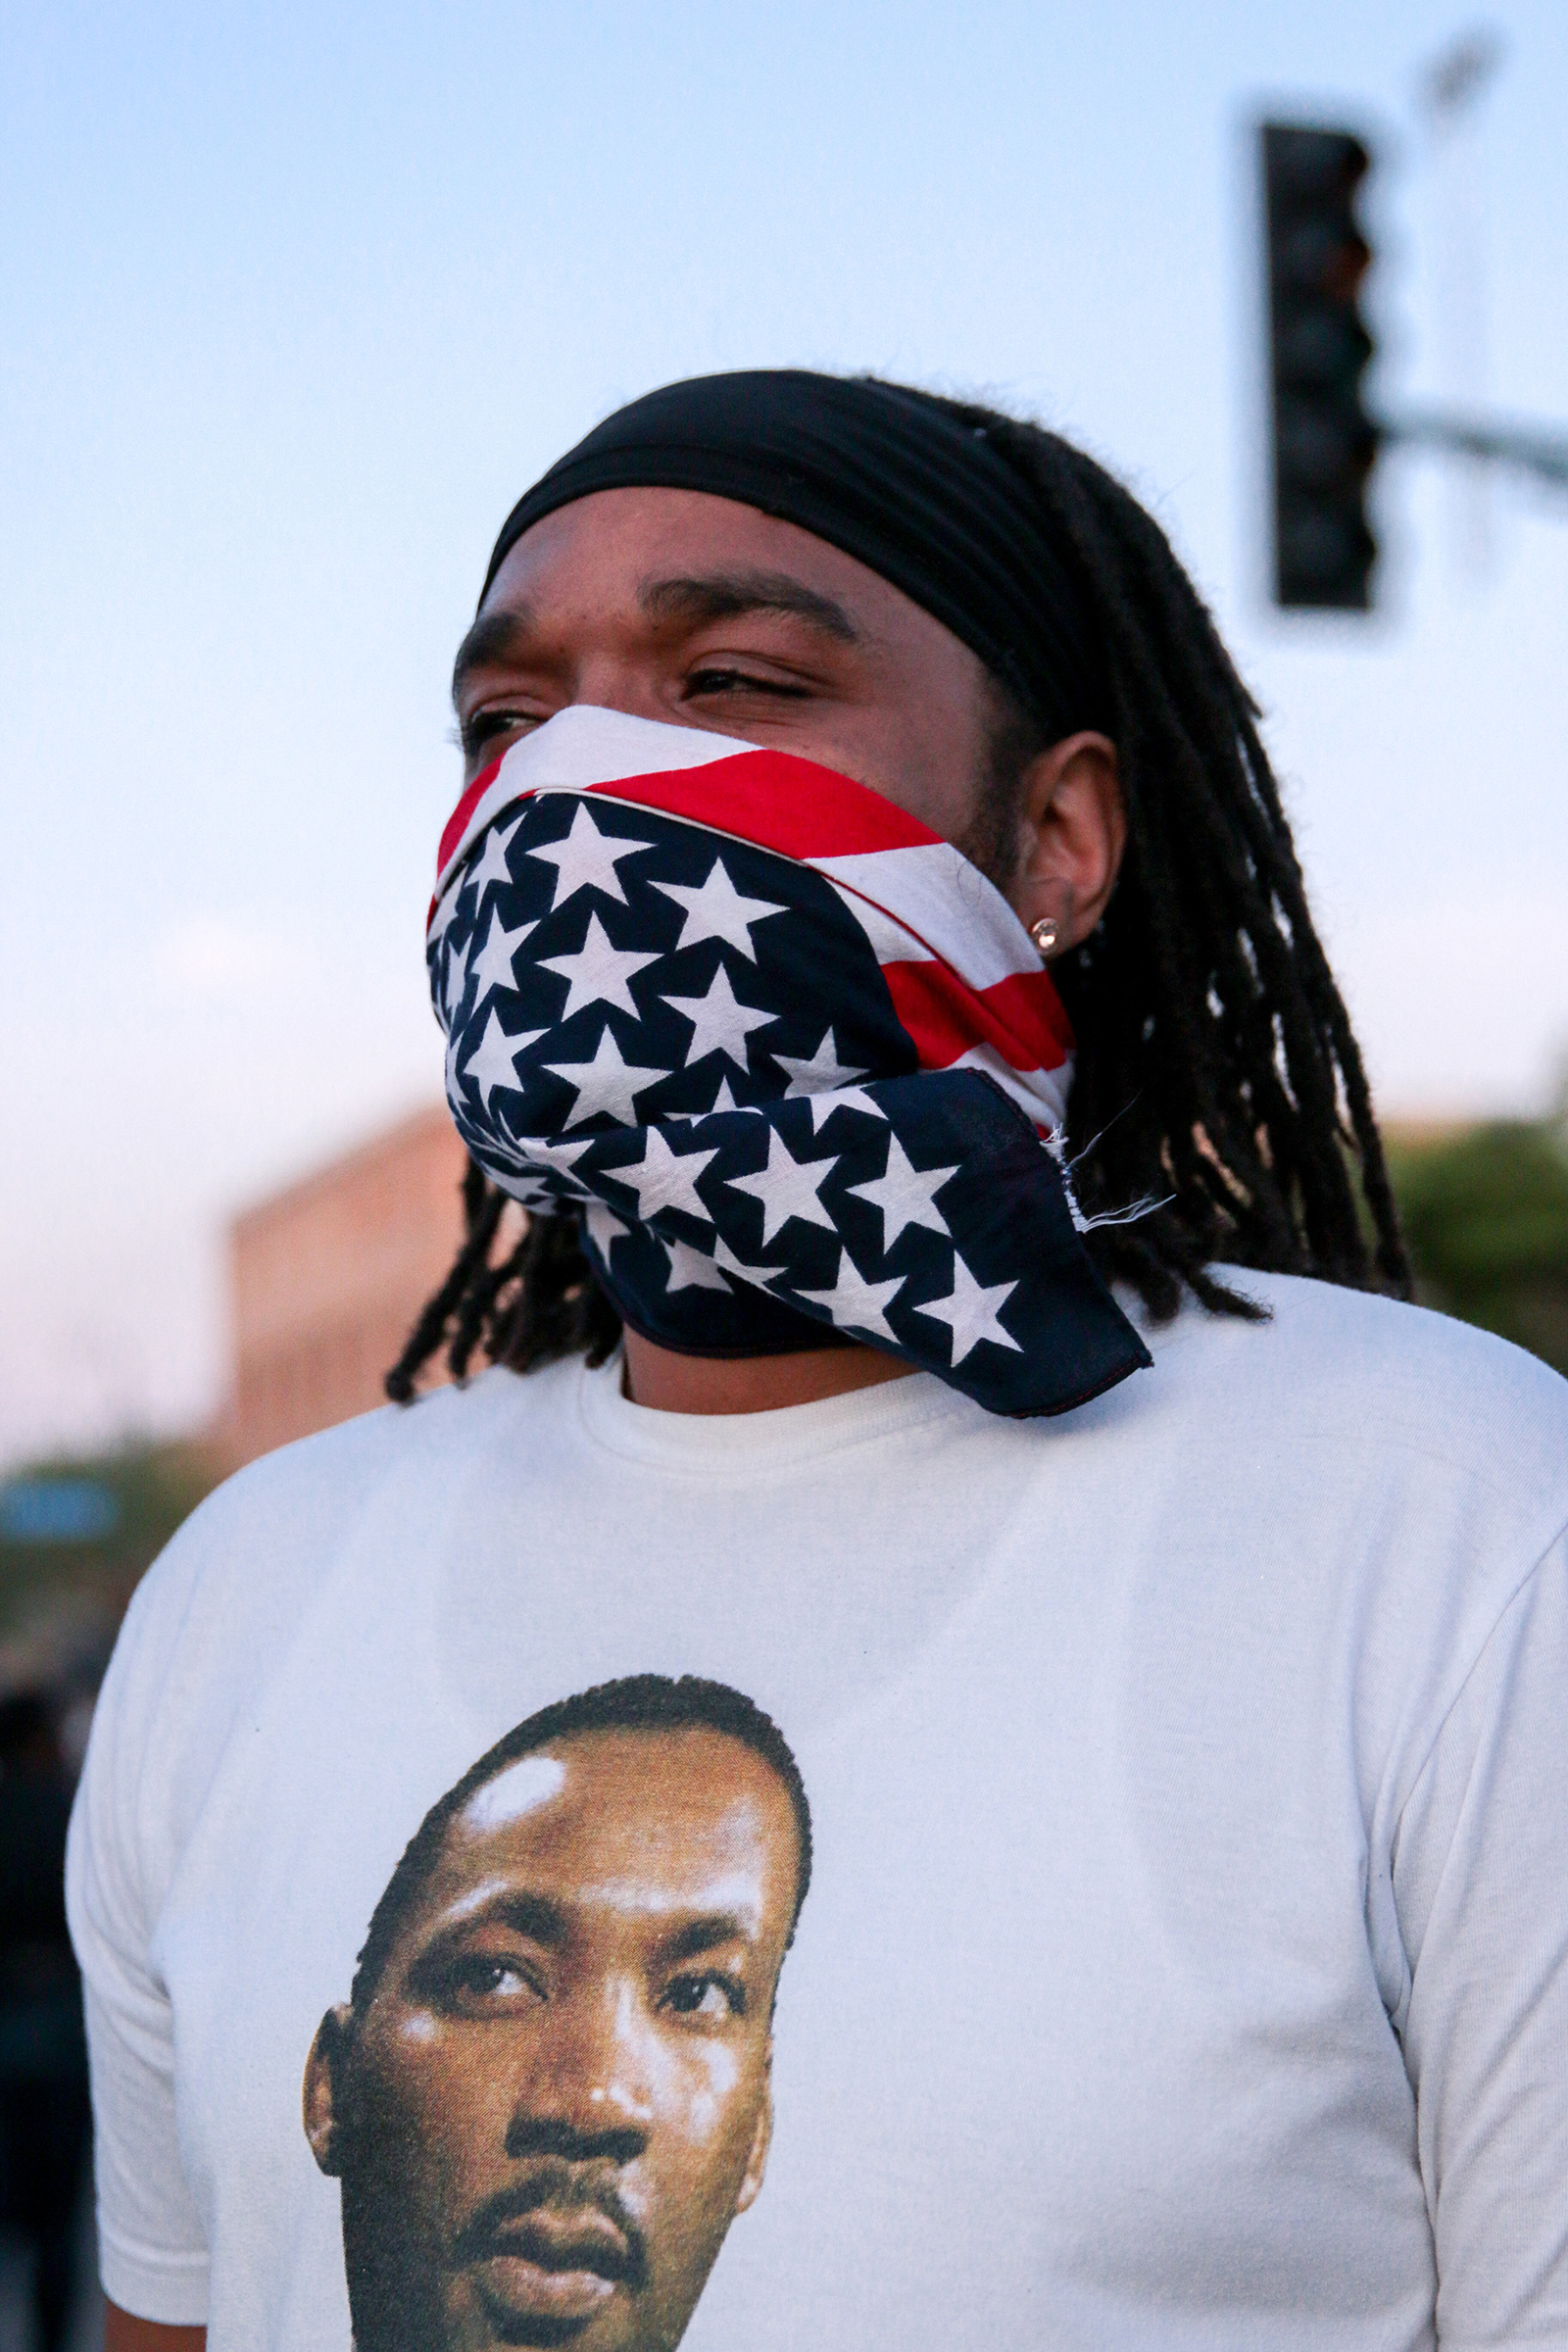 A protester near the 3rd precinct in Minneapolis on May 28. (Patience Zalanga for TIME)